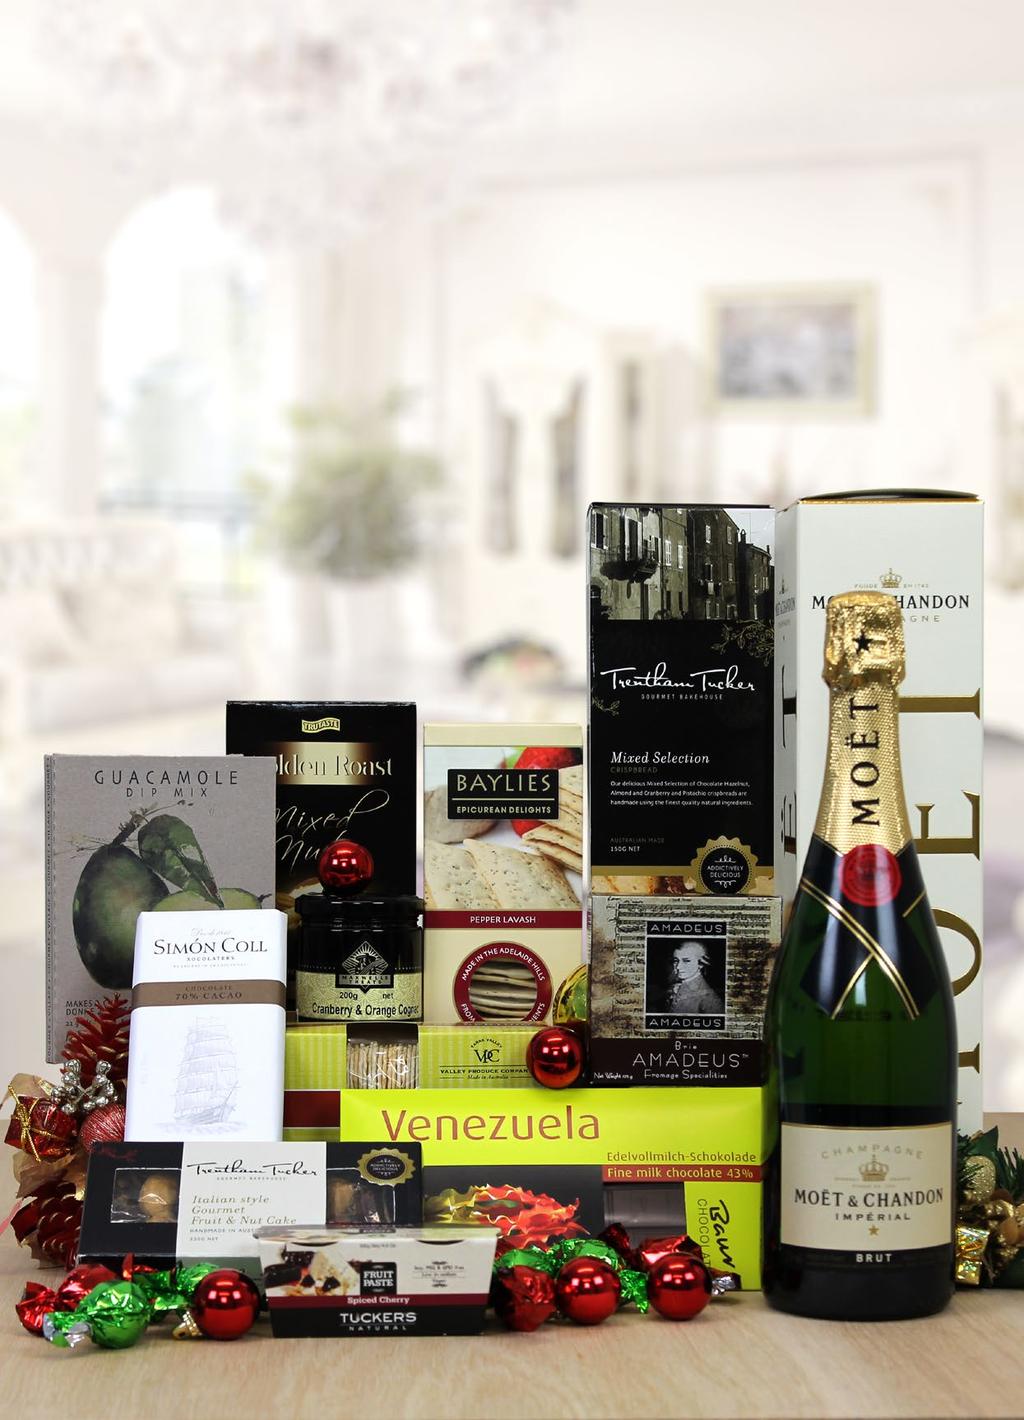 houses, this superb gift box makes a statement like no other. A bottle of iconic Champagne is the most elegant way to convey your compliments of the season.